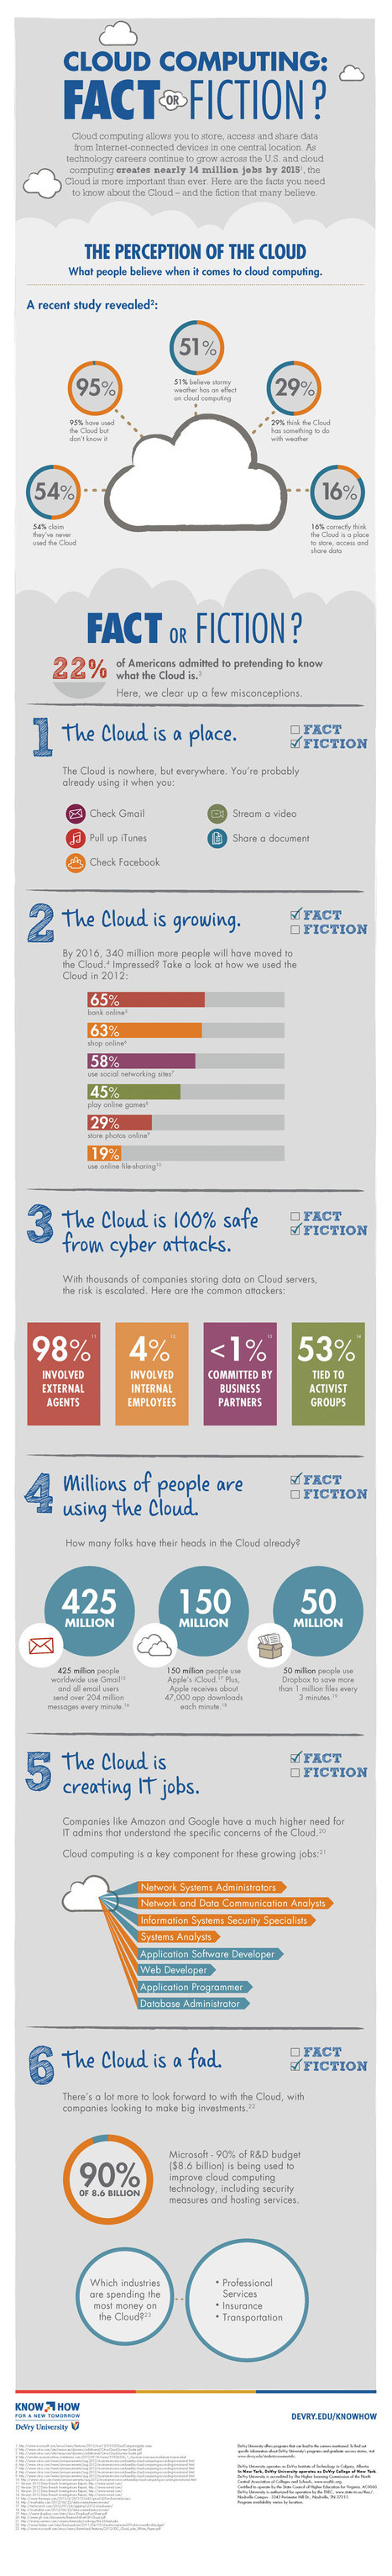 Is Cloud Computing a Fact or Fiction? – infographic | Web 2.0 for juandoming | Scoop.it